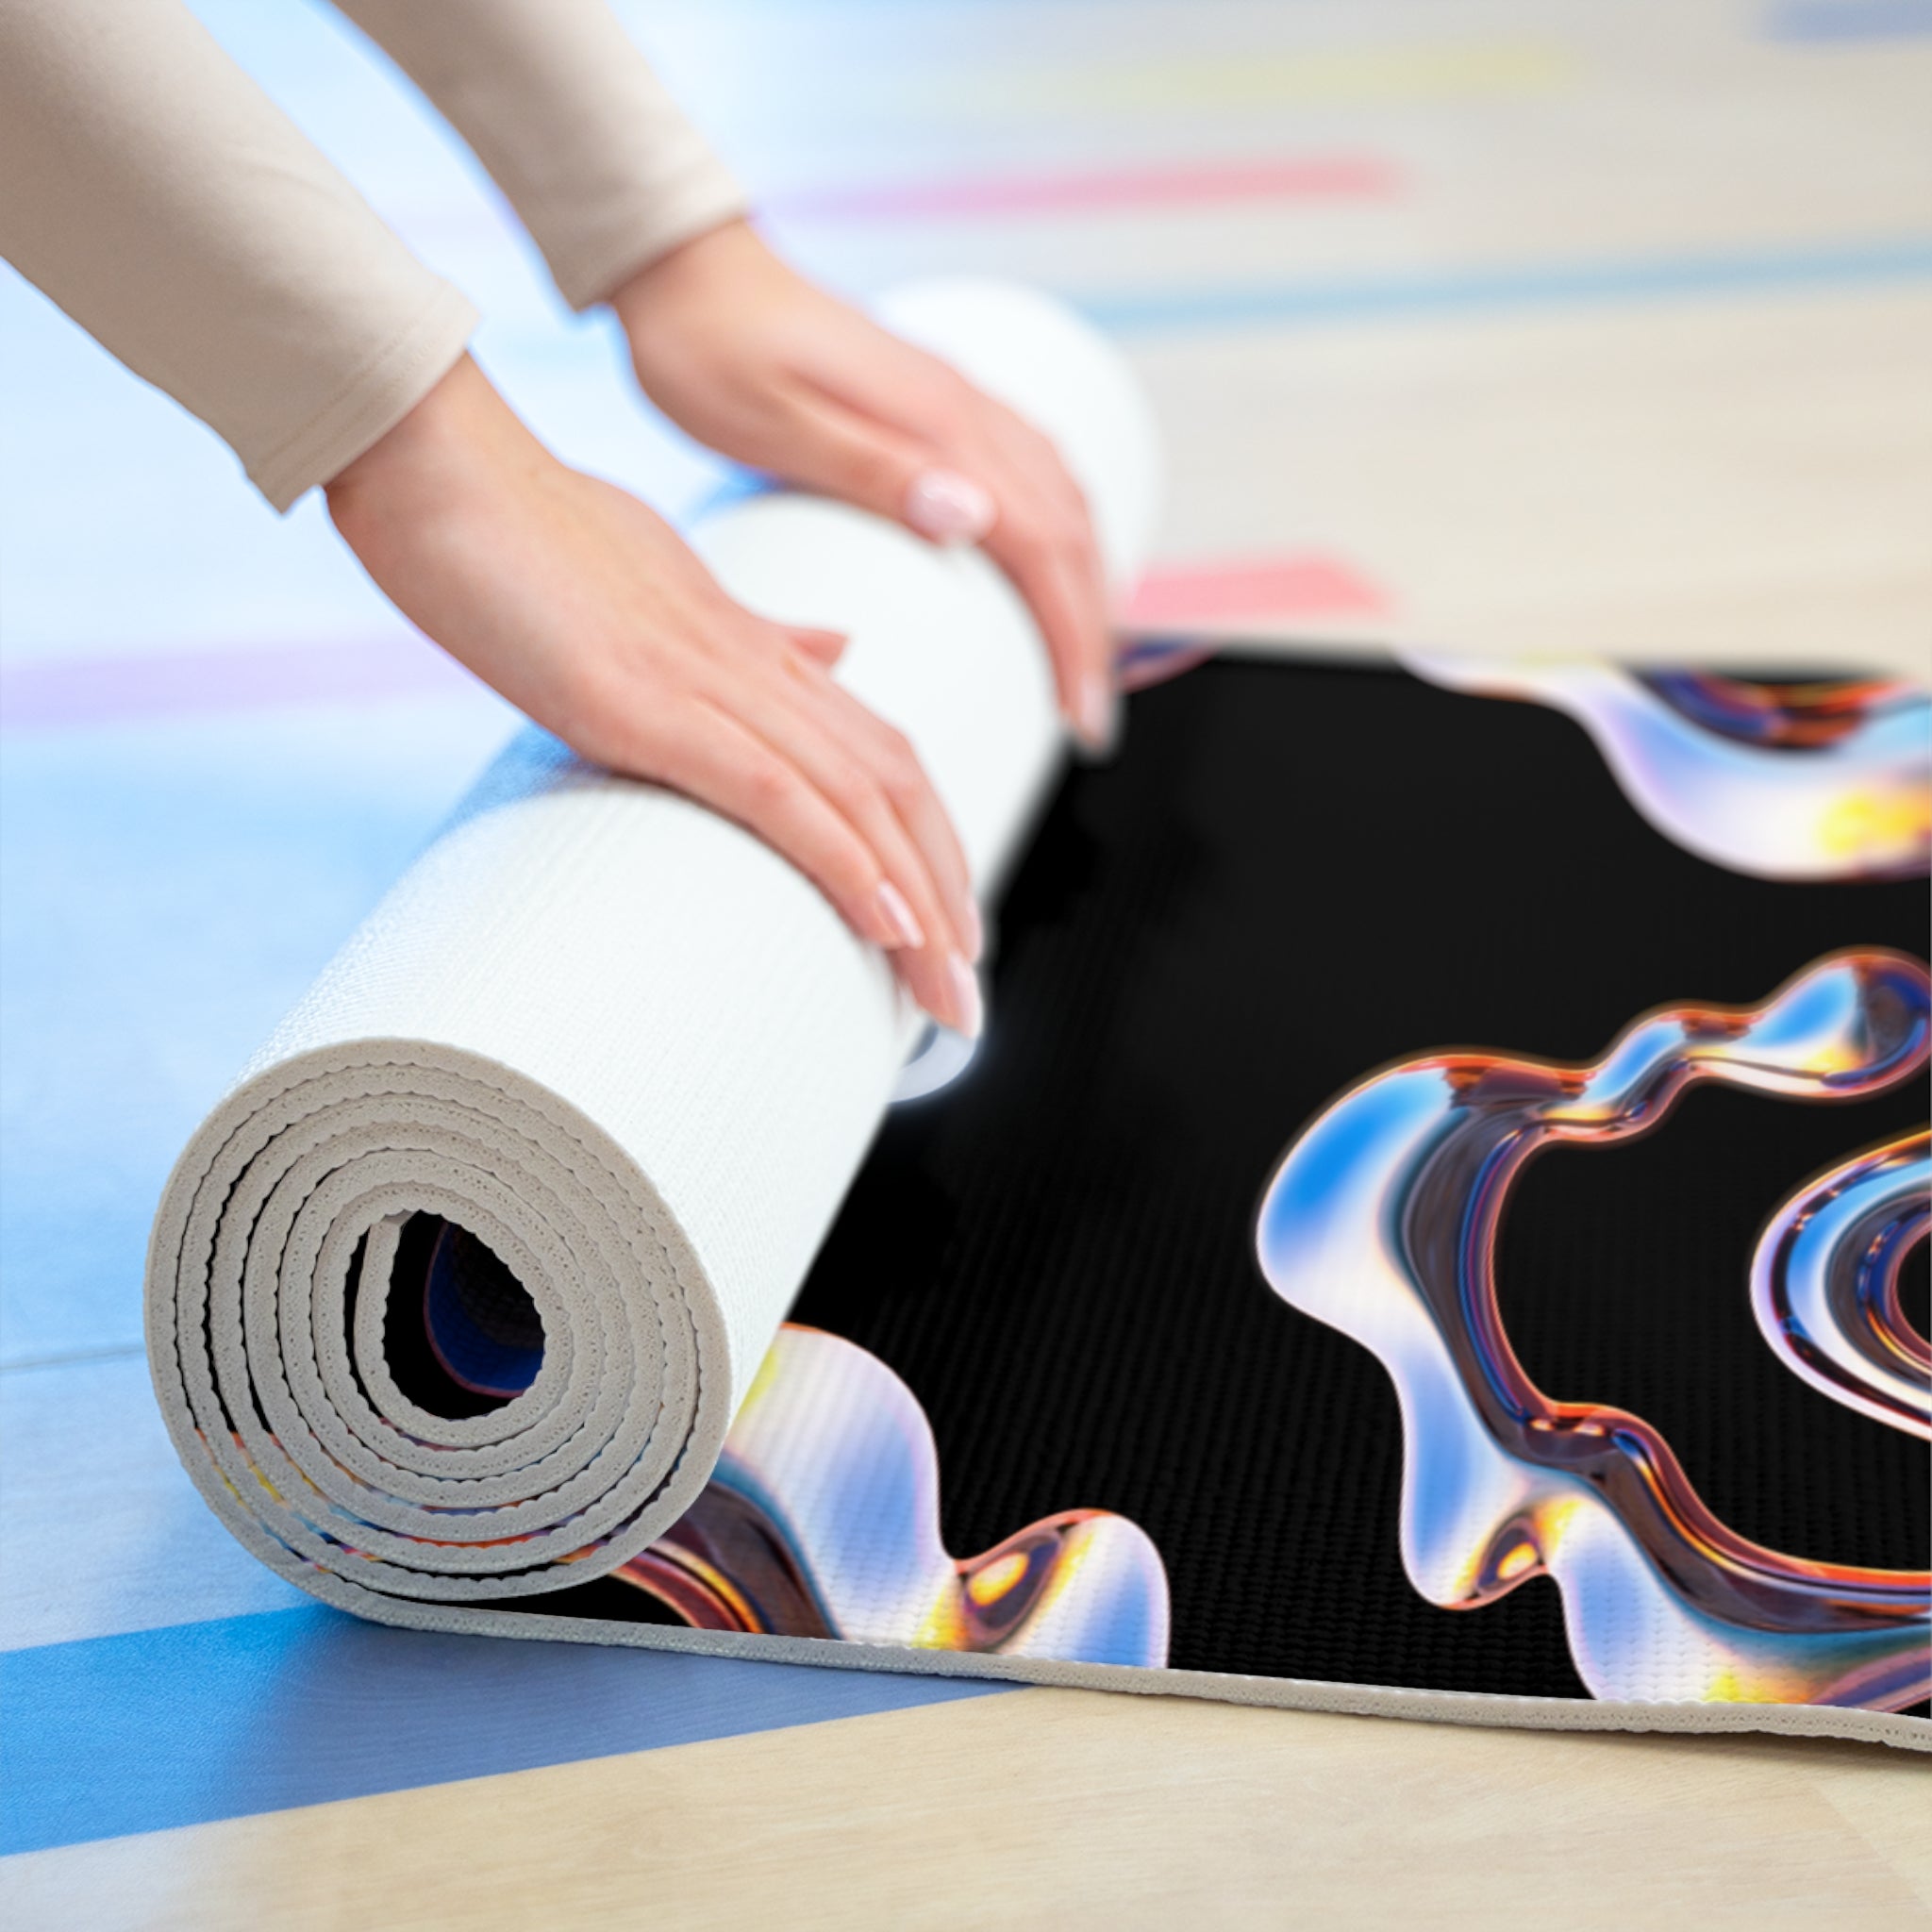 Find your space away from space with this unique Cosmic foam yoga mat. Mats are lightweight, cushion you from impacts, and measure 24" x 72" x 0.25" in size. Namaste!